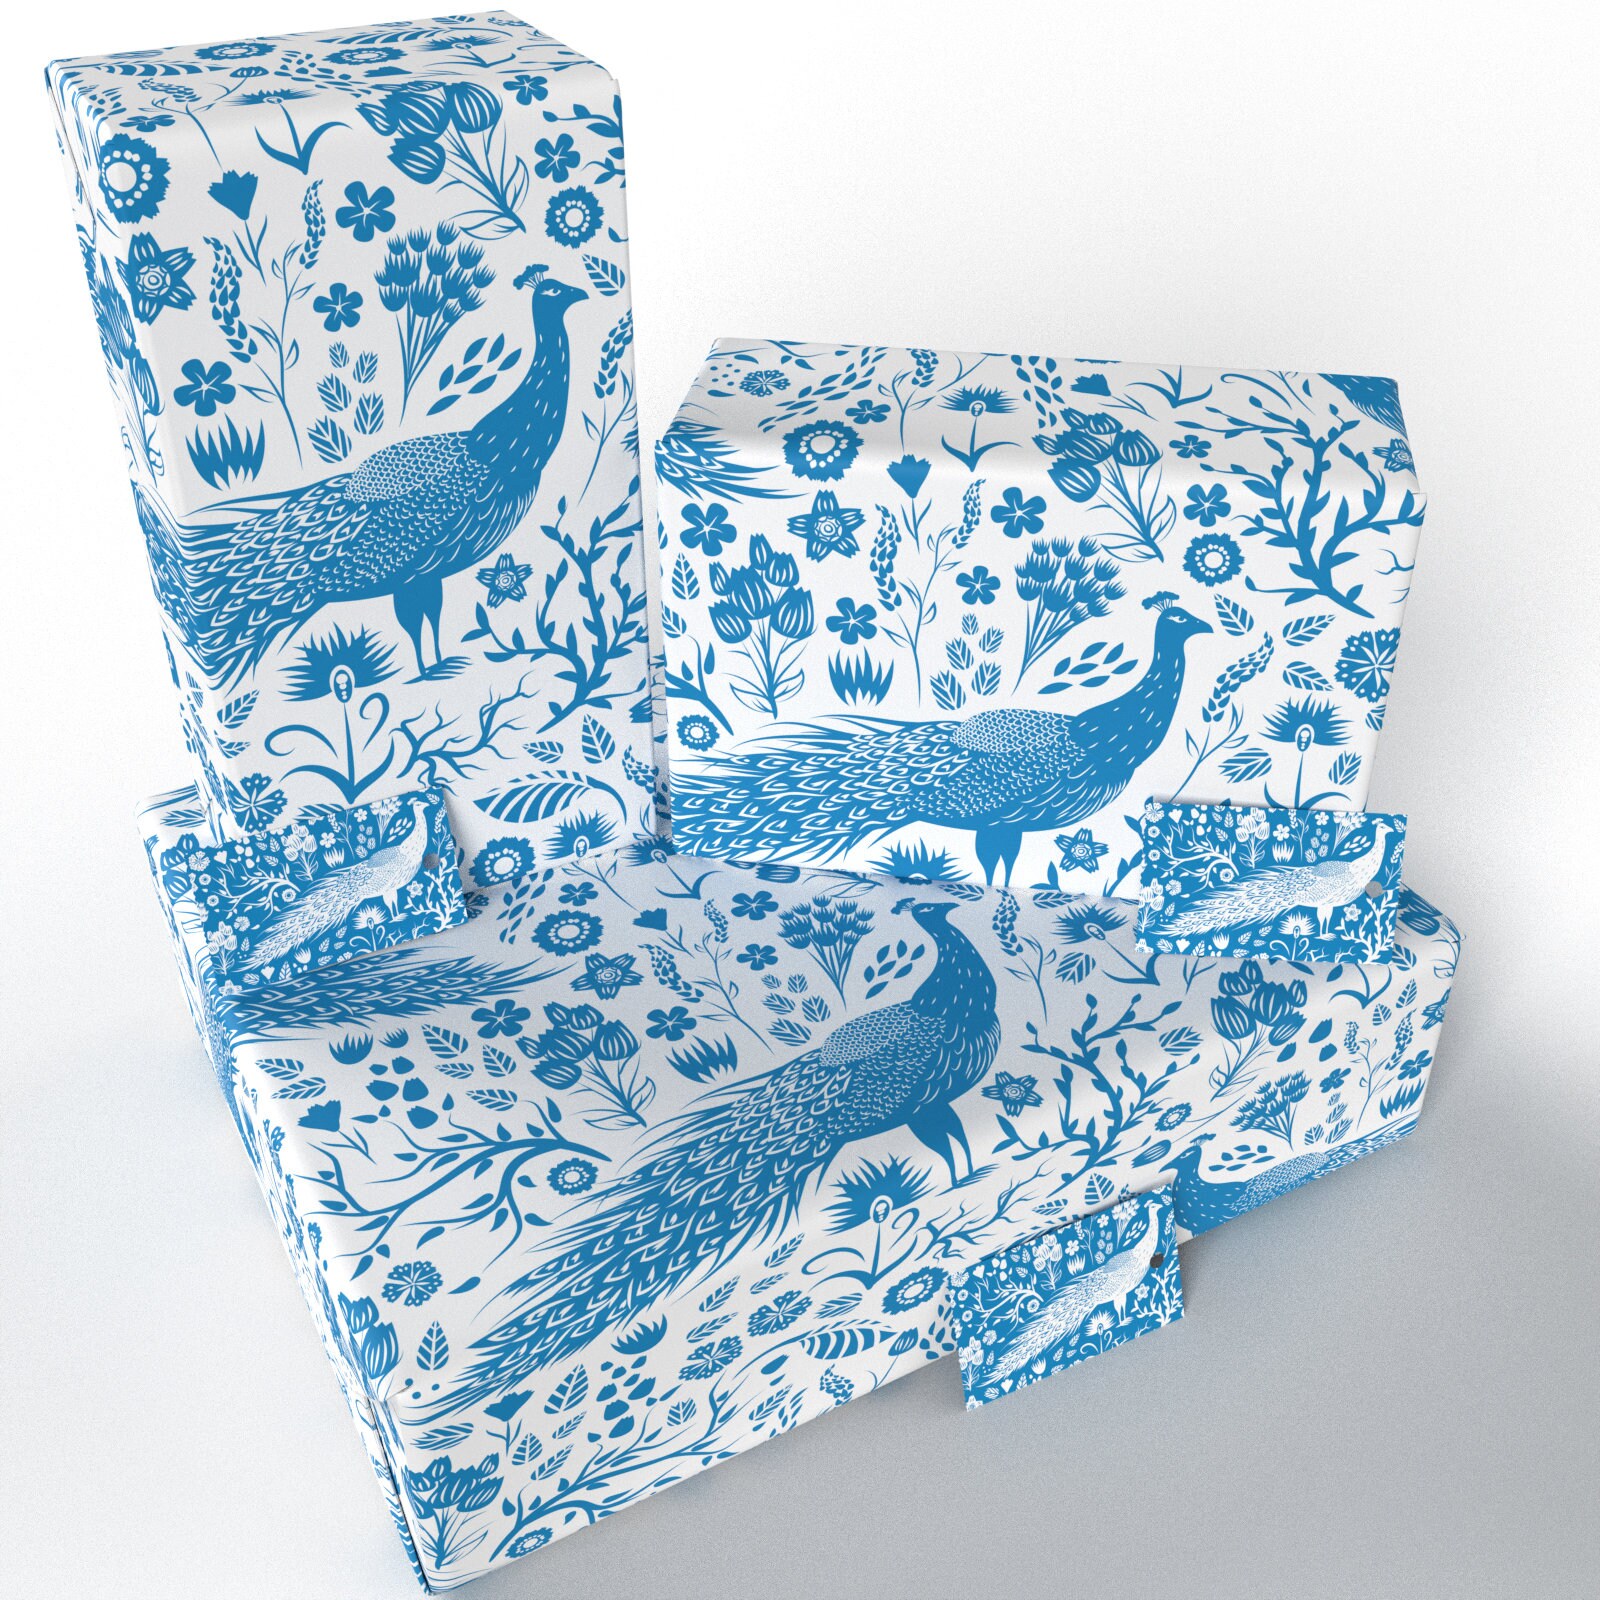 Dark Blue Floral Wrapping Paper, Gift Wrapping, Wrapping Paper, 2, 5 or 10  Sheets , Comes in a Tube Box